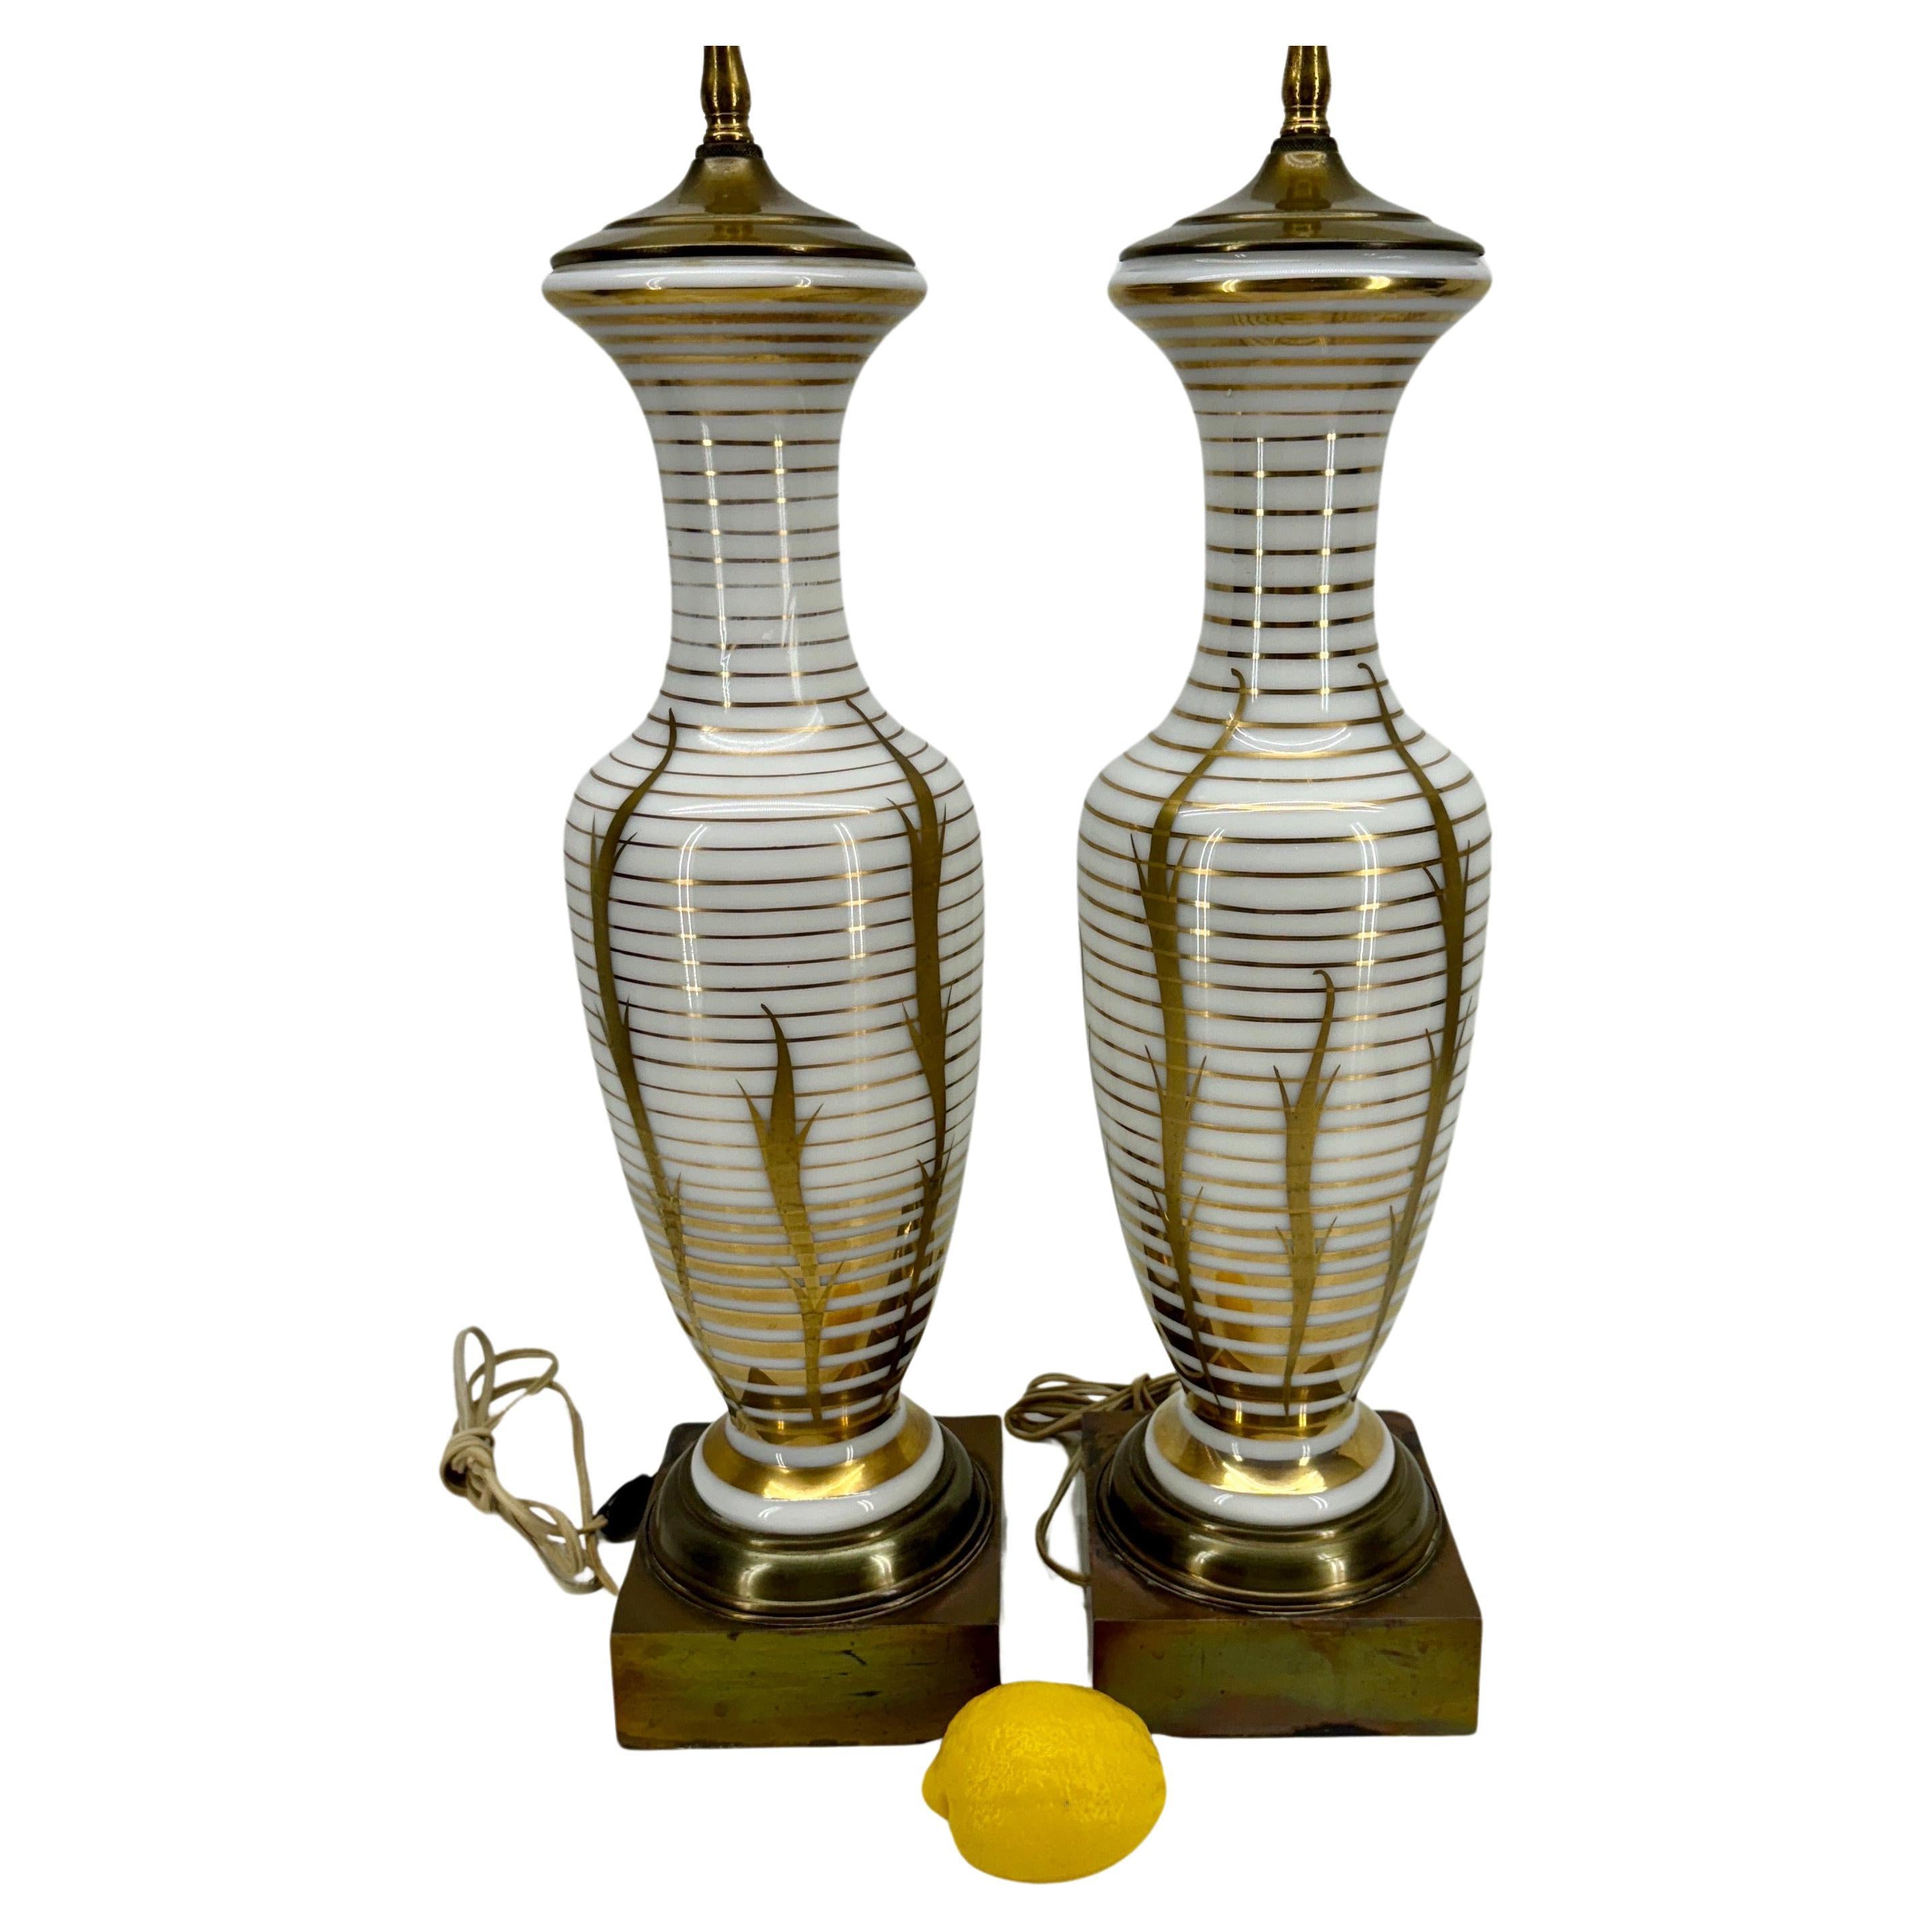 Opaline Glass Gilt Gold Decorated Table Lamps, A Pair

Illuminate your home with these Opaline Glass with gold-banded and striped Mid Century Modern Table Lamps. These exquisite lamps are not only a source of light but also a statement of luxury and